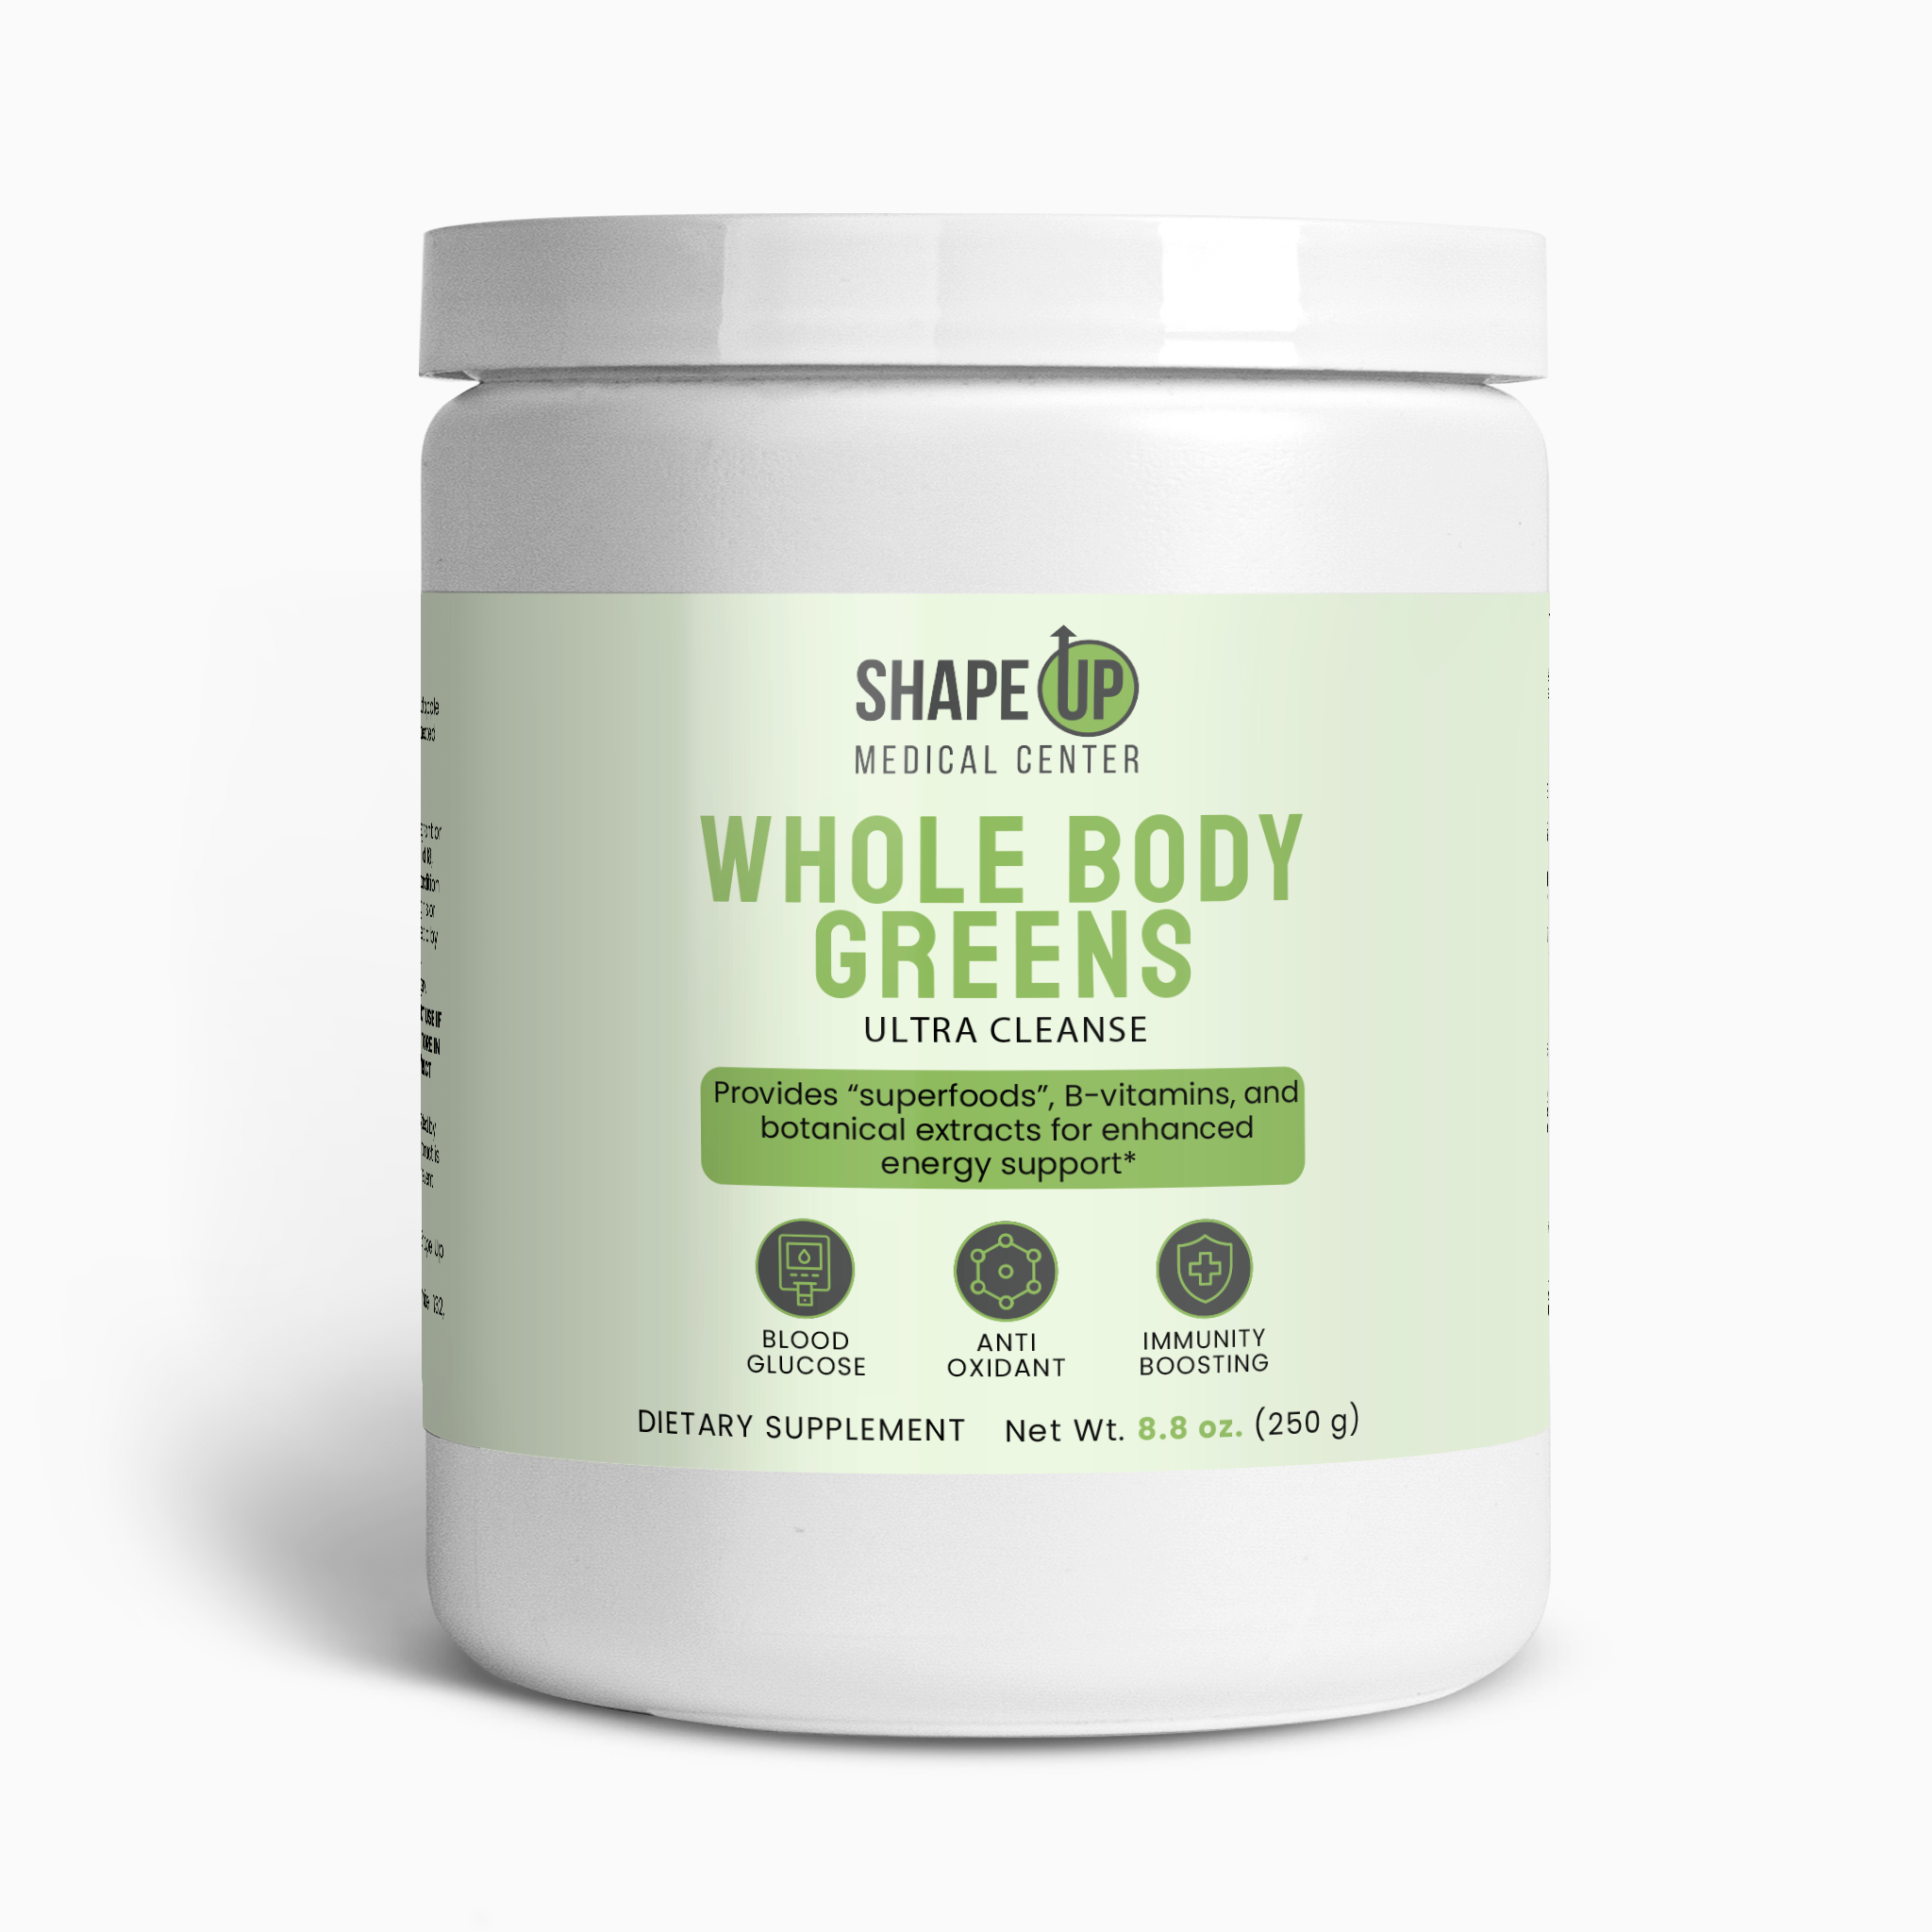 WHOLE BODY GREENS